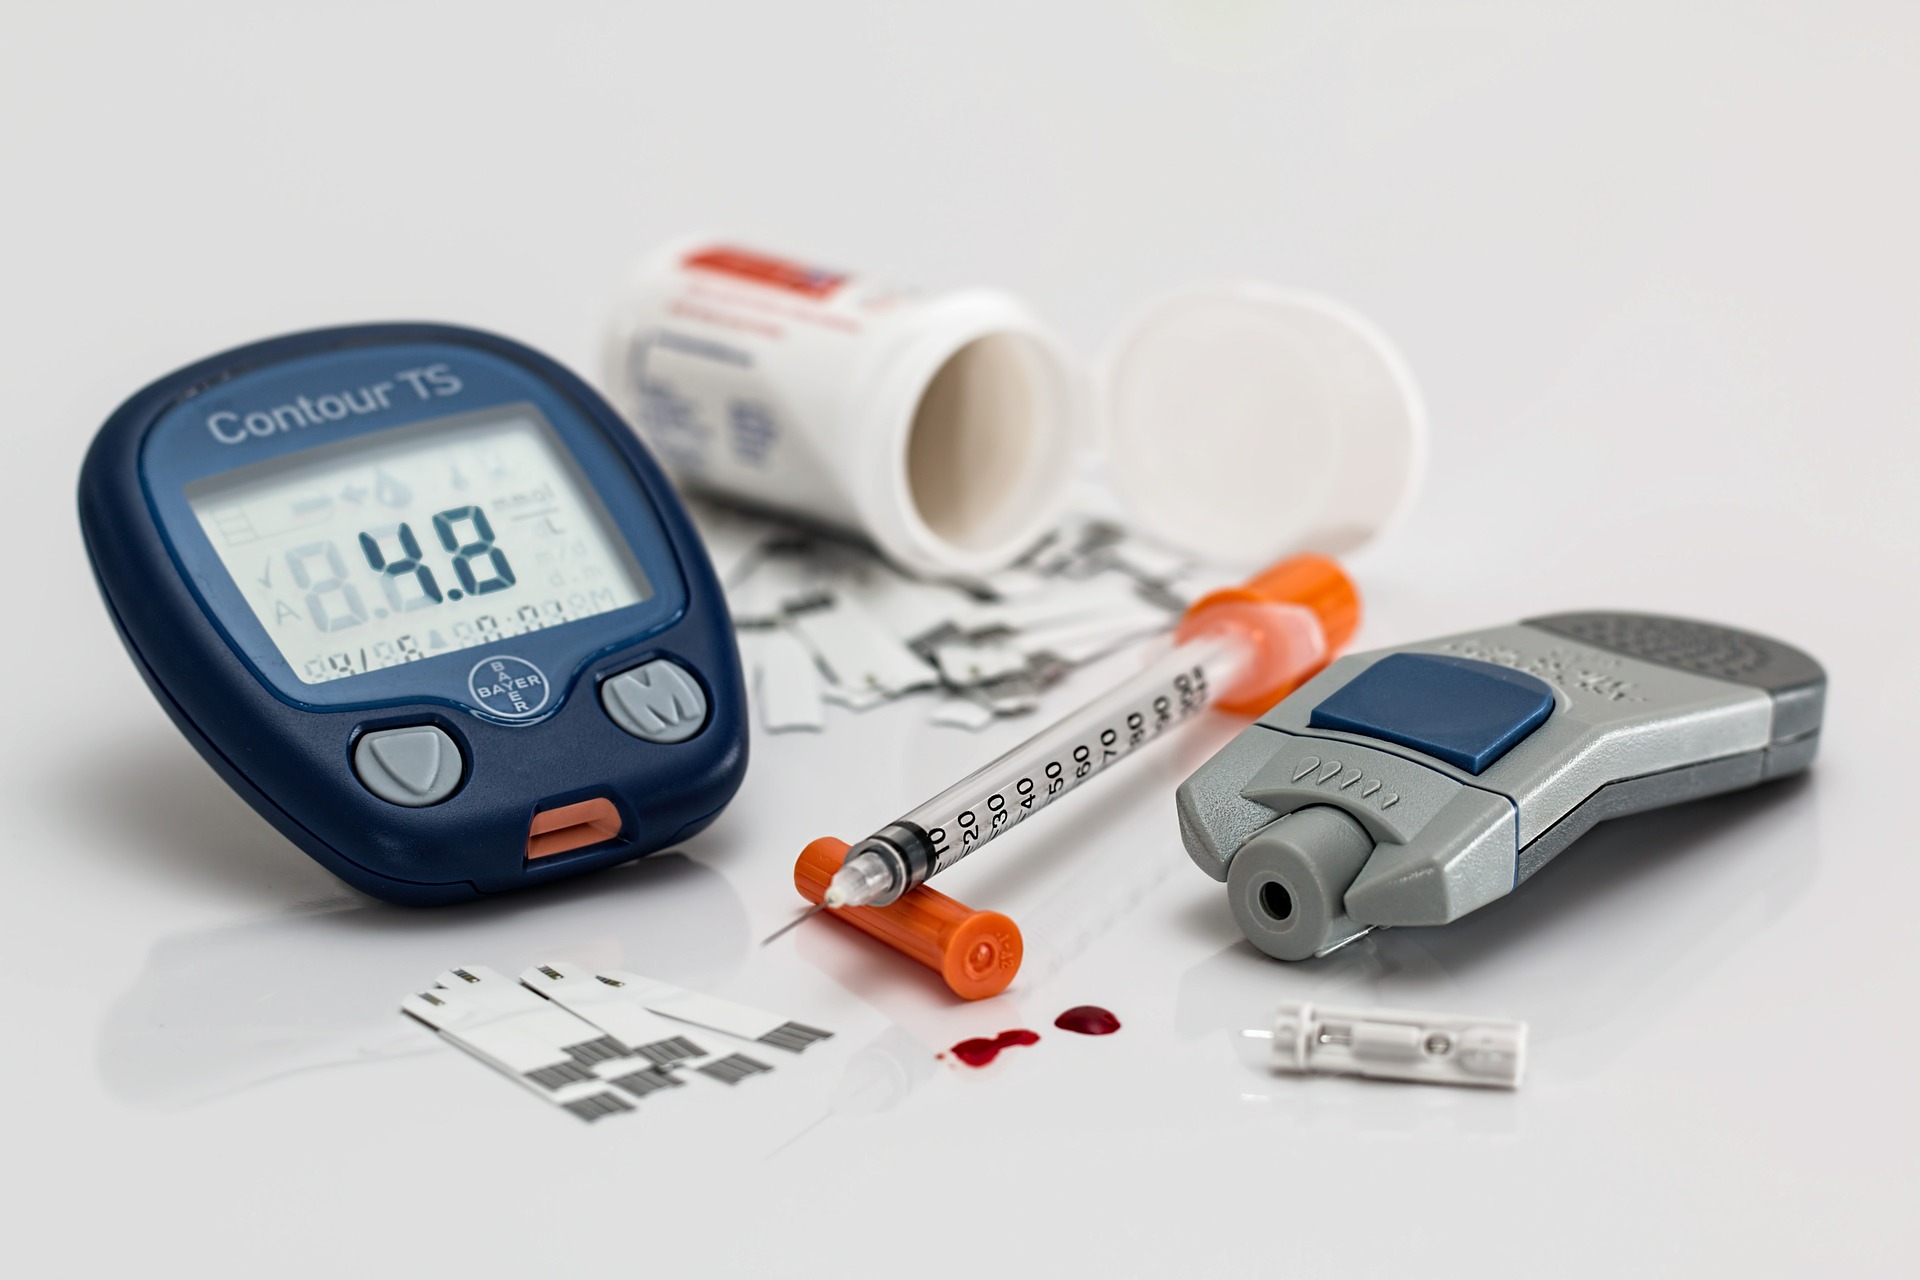 Blood sugar test and diabetes medication Image by Steve Buissinne from Pixabay 